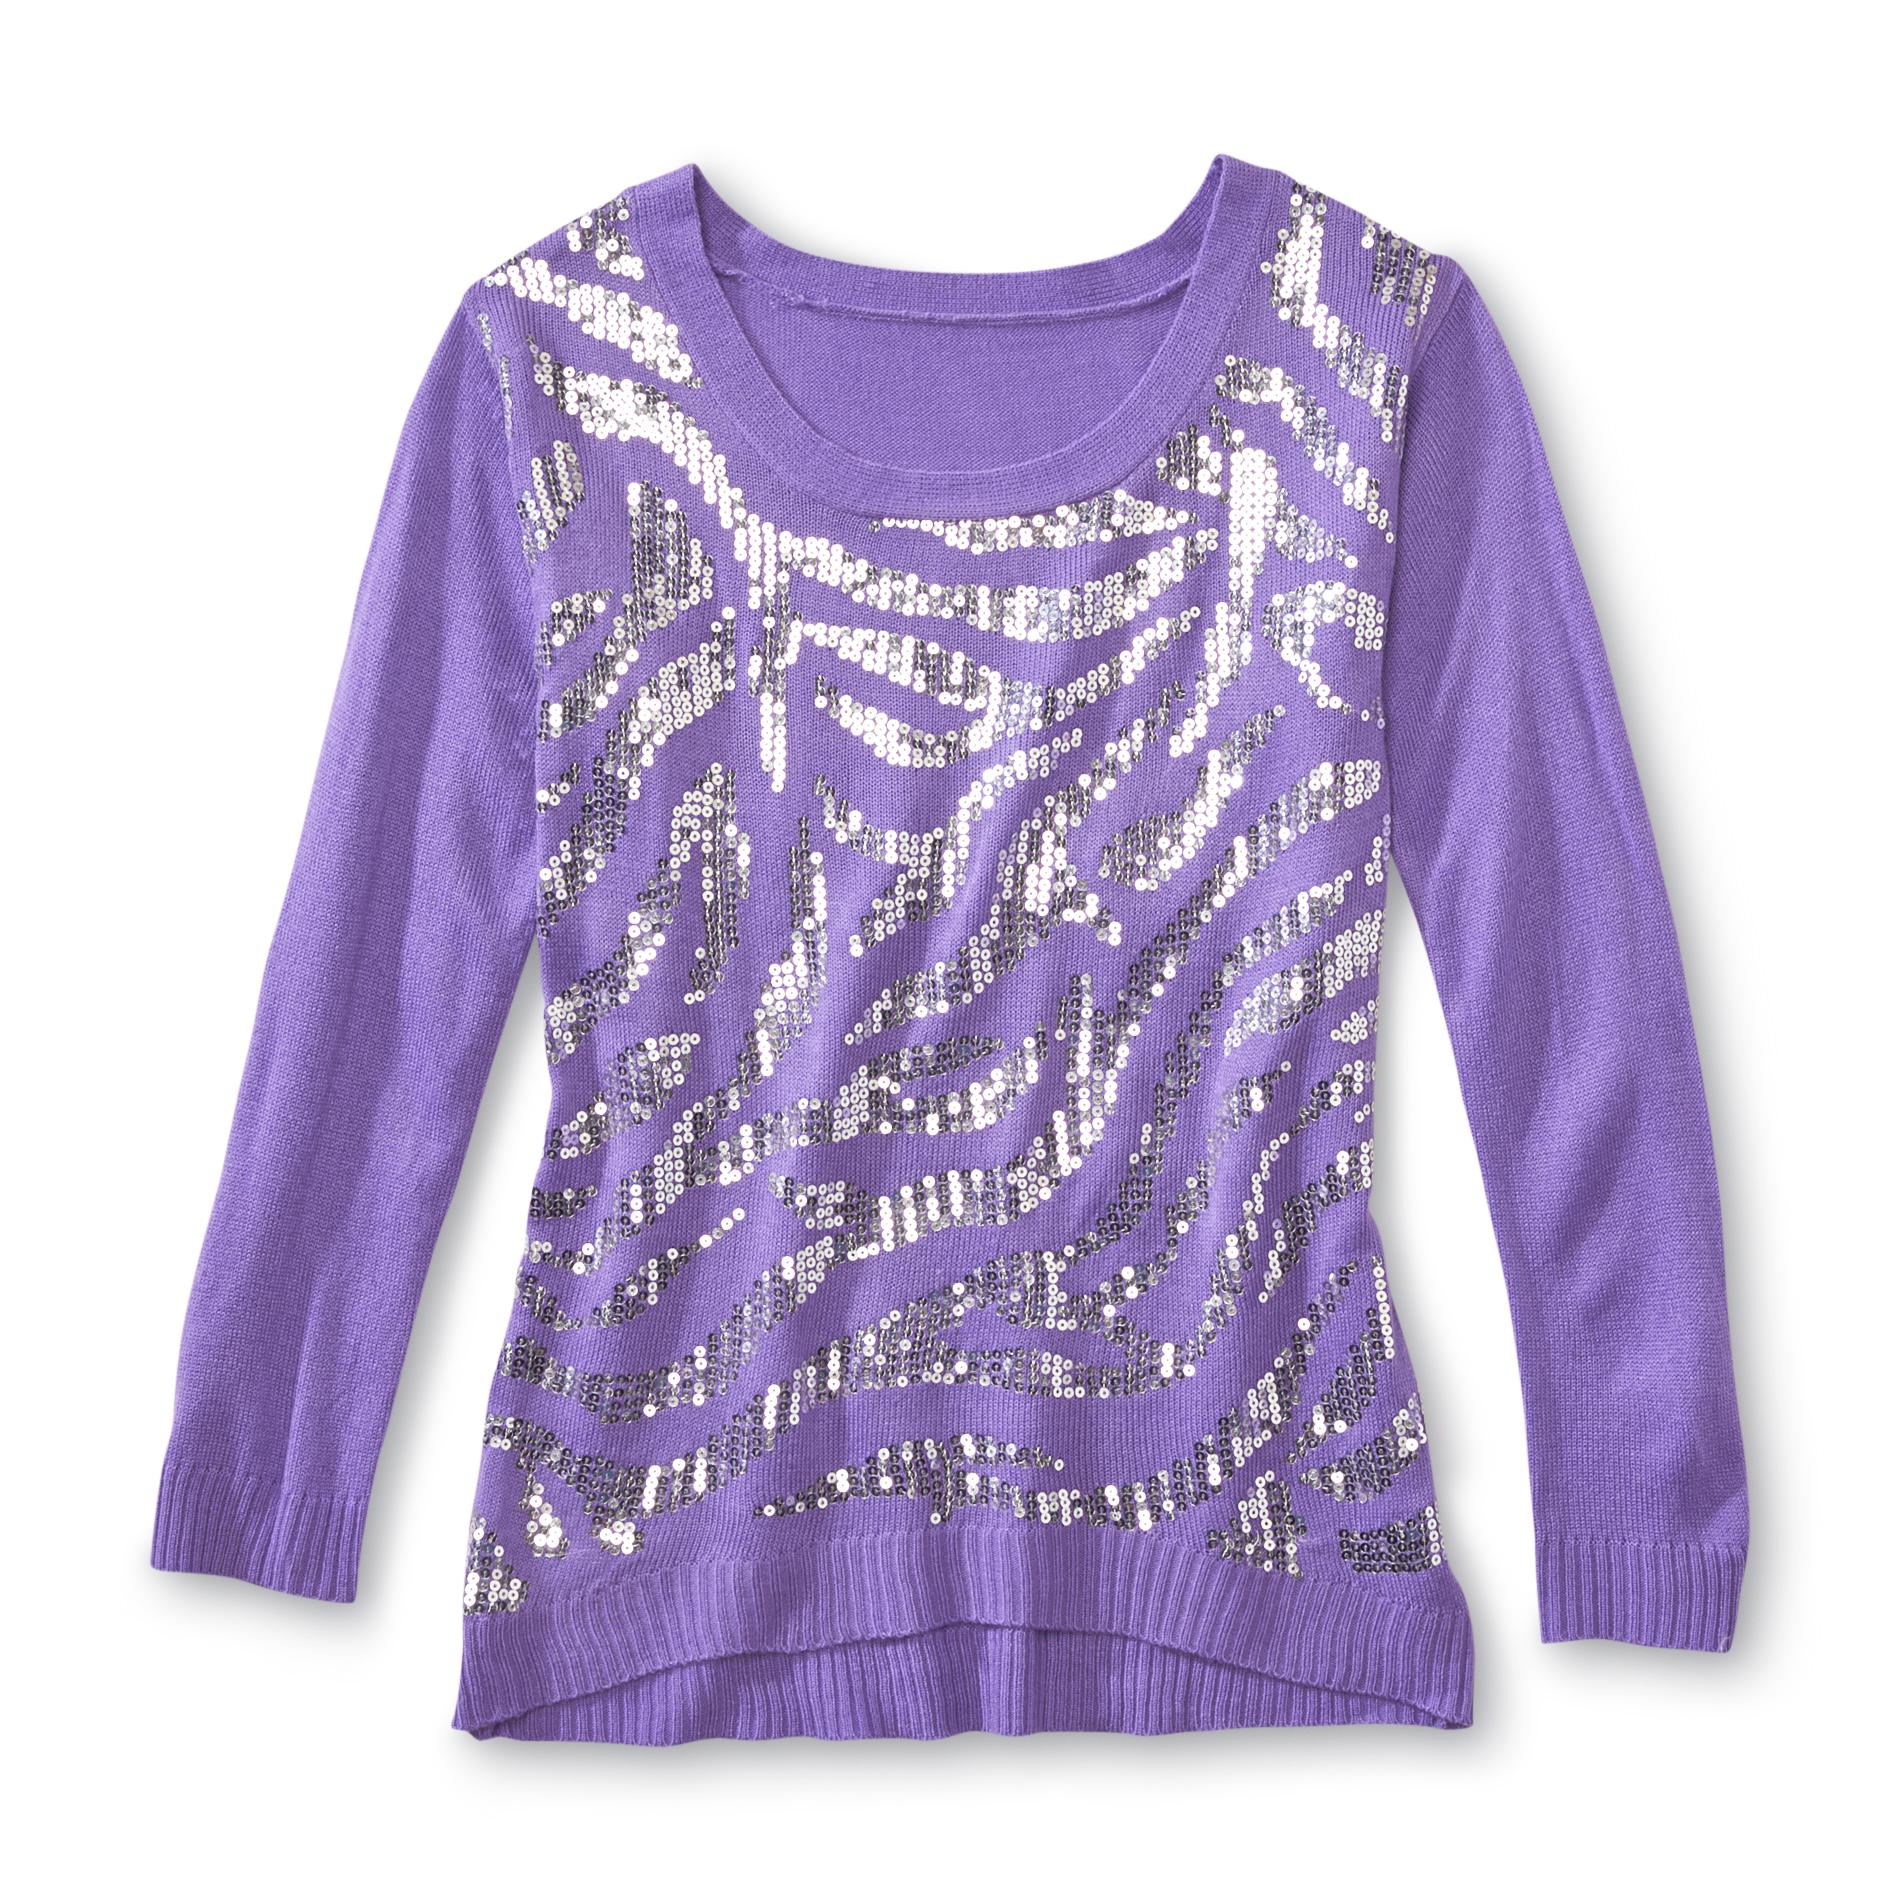 Piper Girl's Long-Sleeve Sweater - Sequined Animal Print